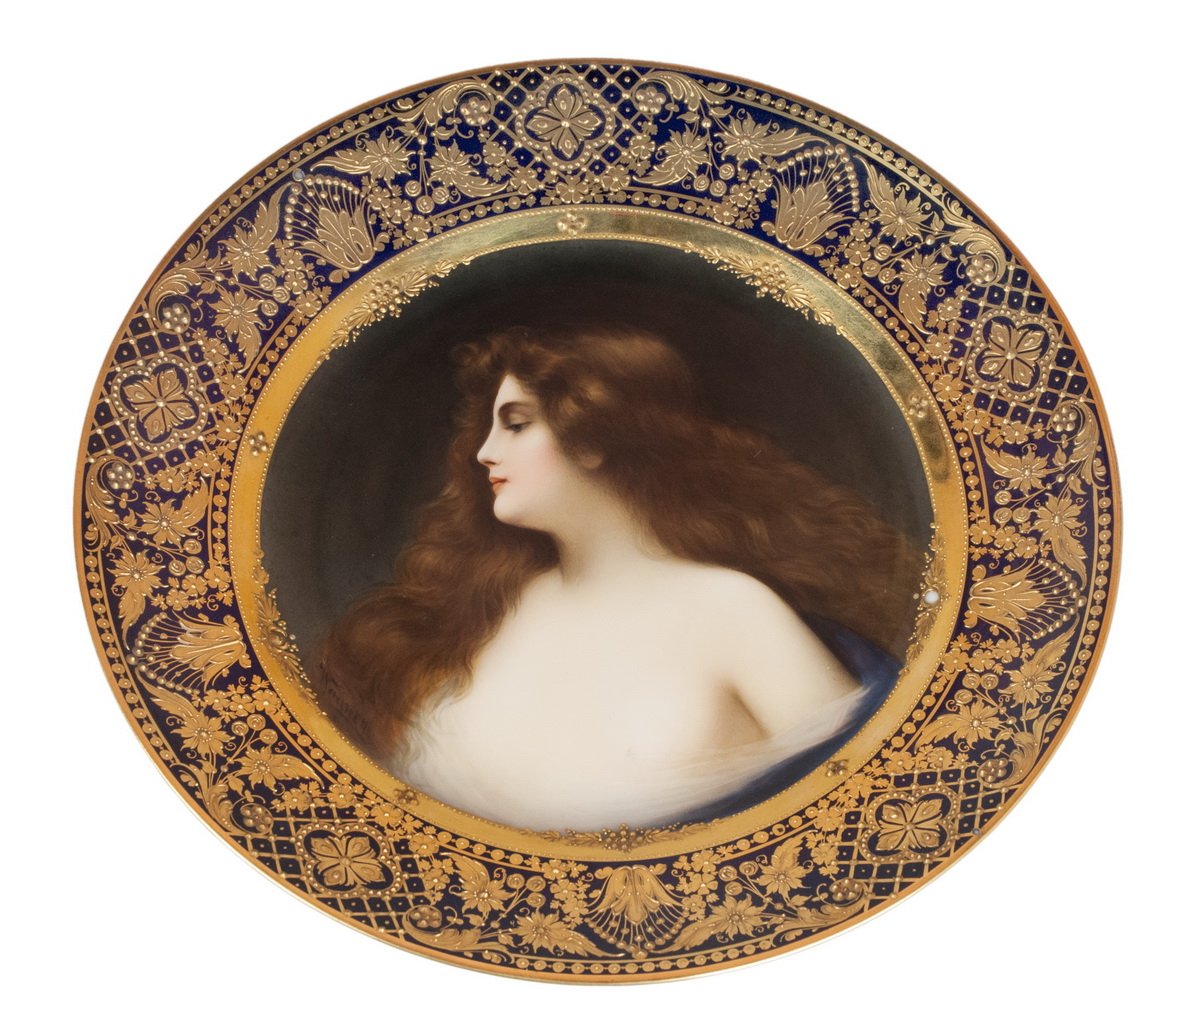 Decor Art. Decorative plate with a woman